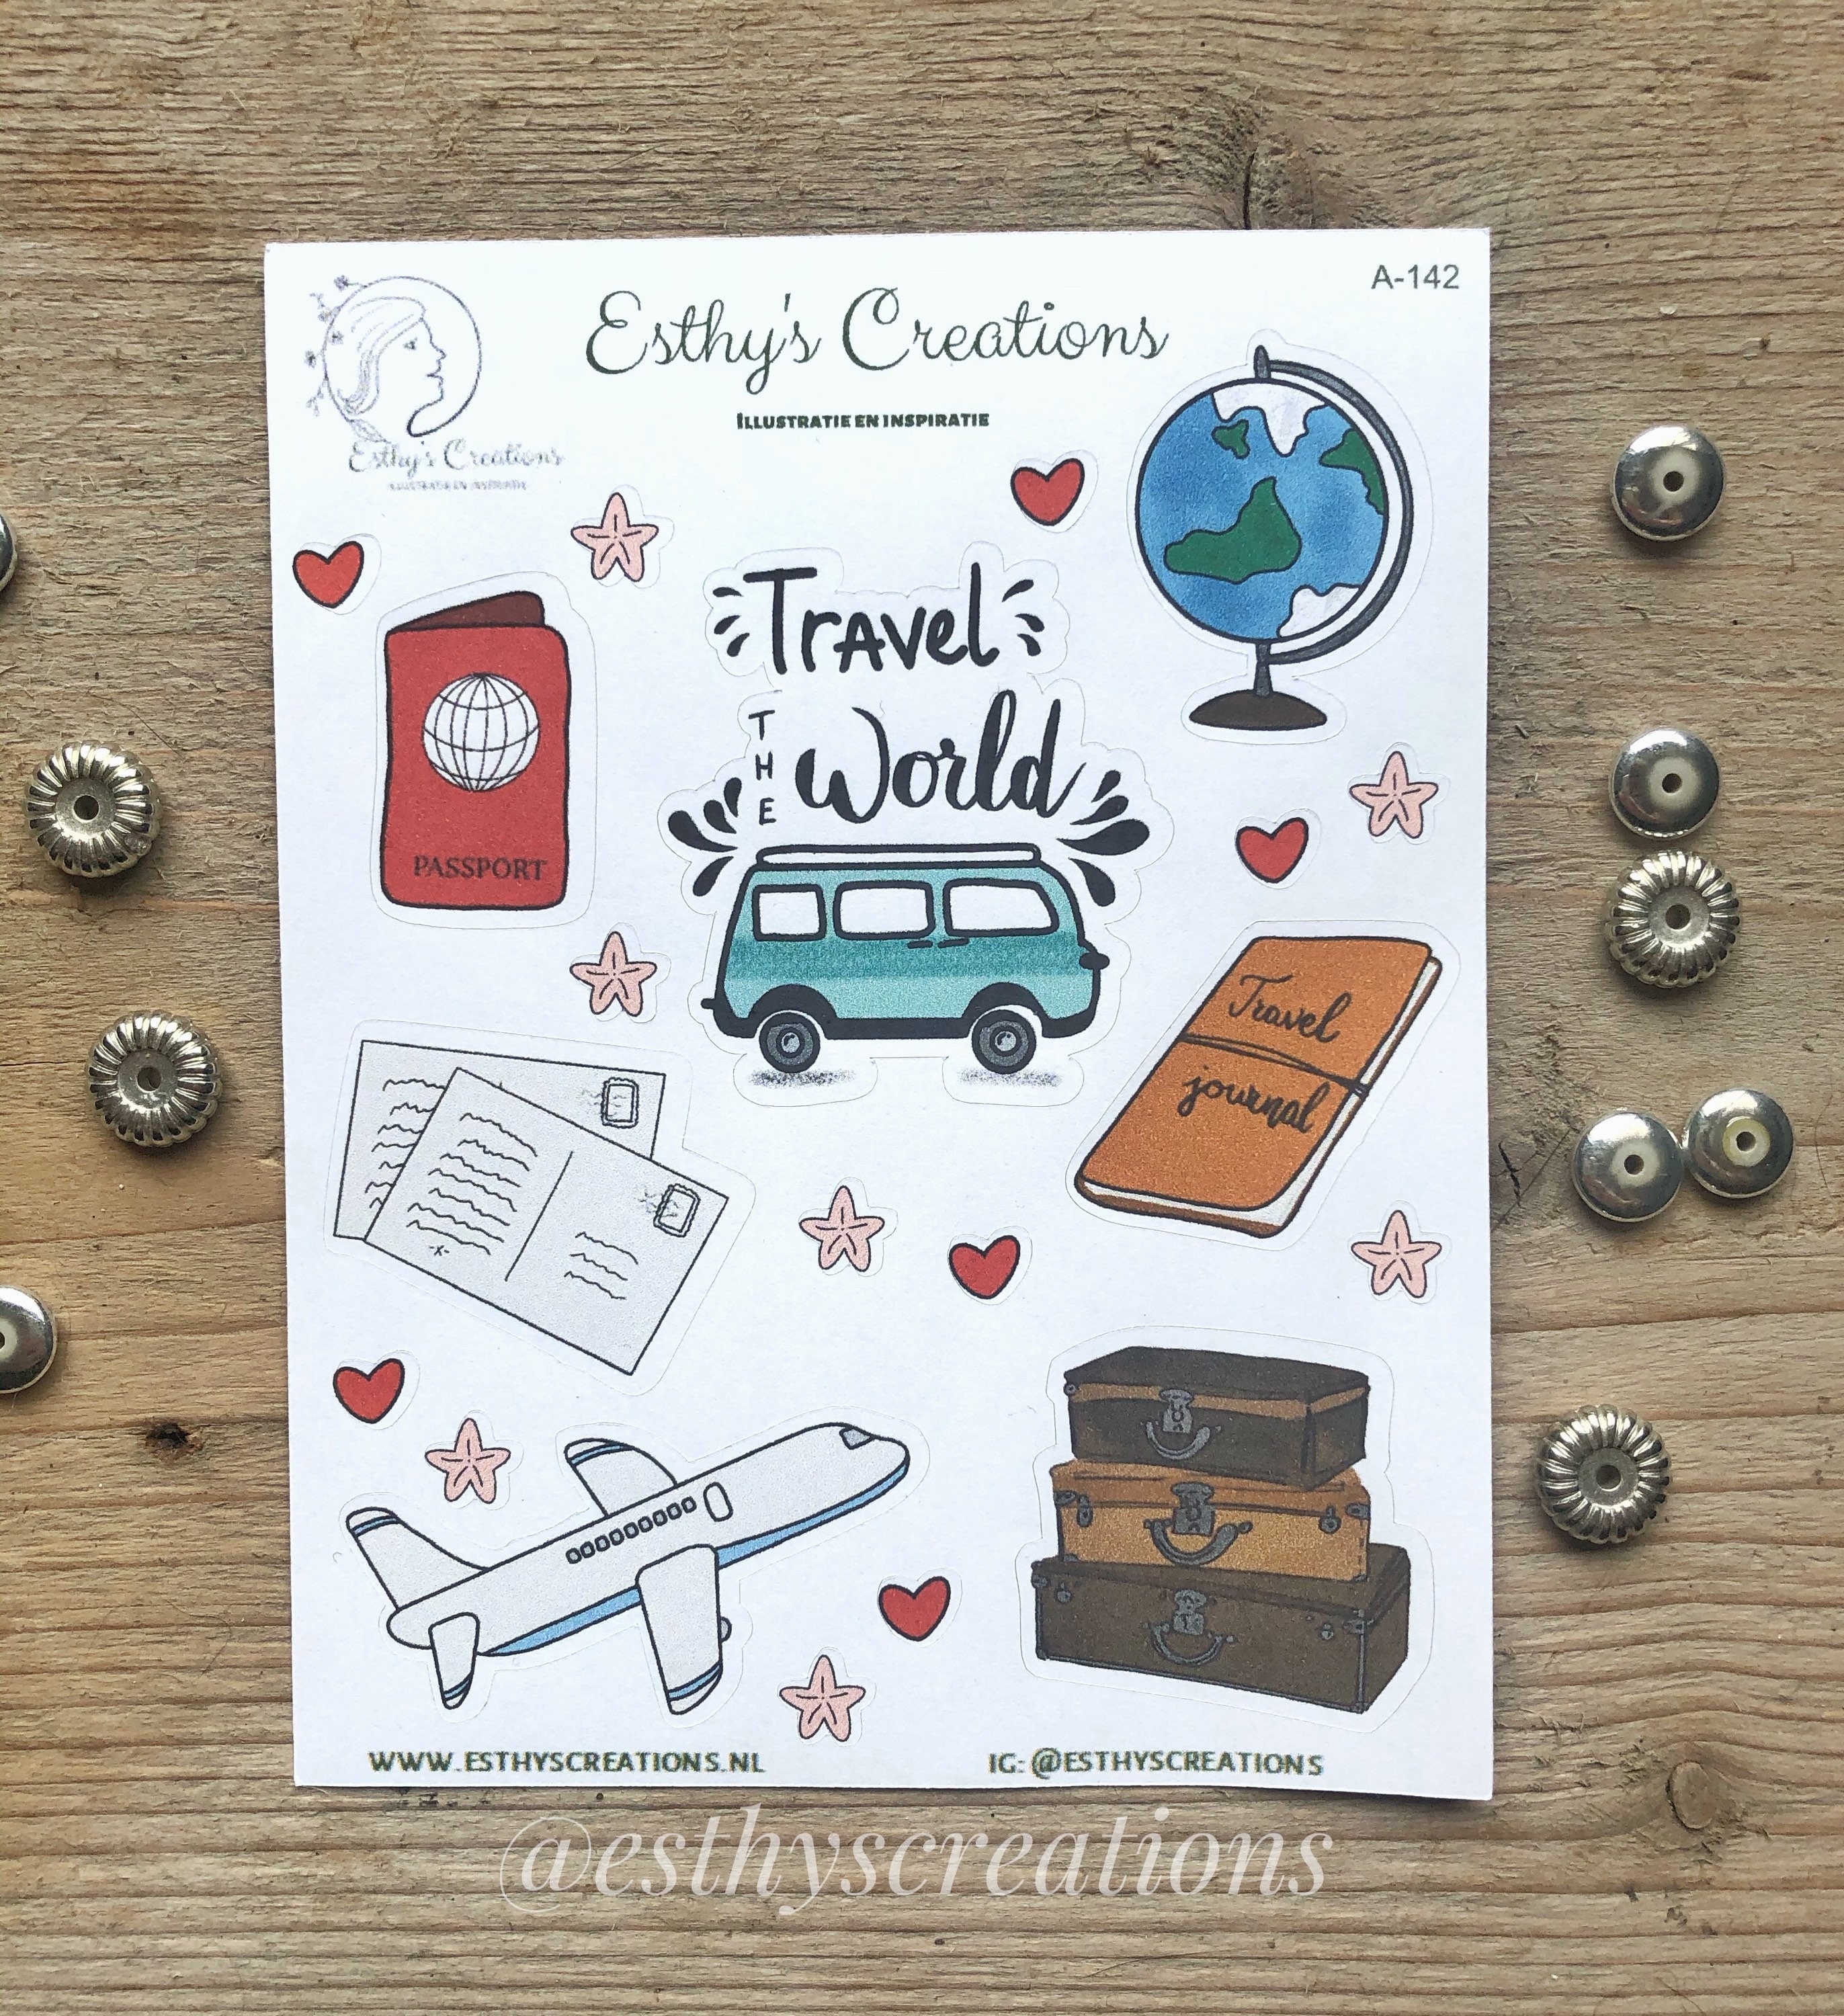 Woolly the Sheep, Sticker, Suitcase, Travelling, Vakantie, Koffer